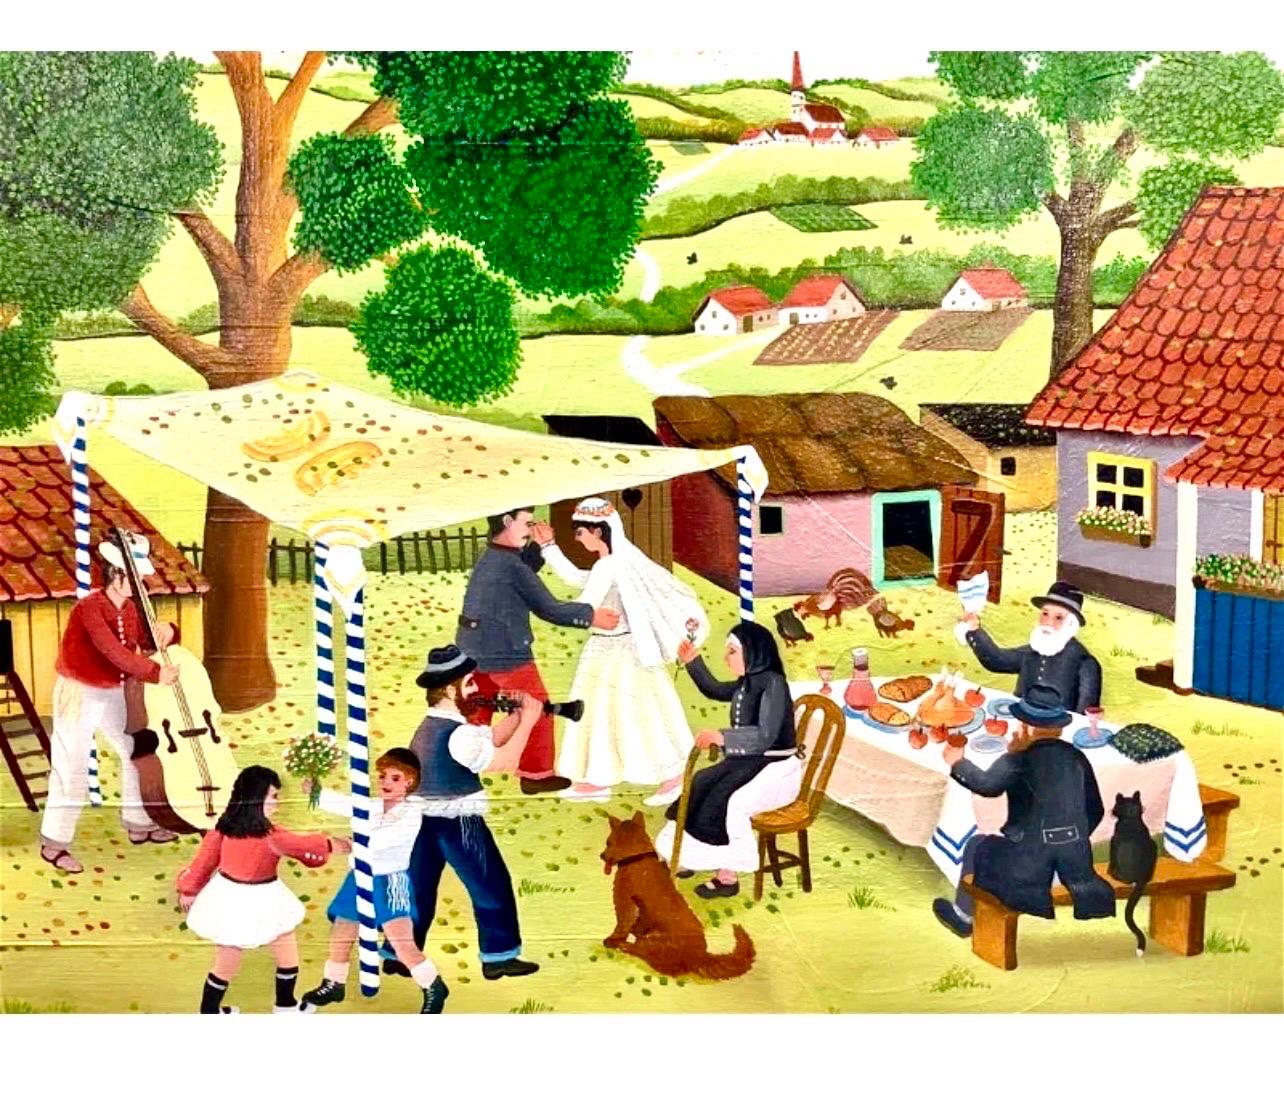 Hand signed in lower right corner Paradis 96.
Depicts a Jewish wedding celebration with music and people dancing with a small shtetl village and synagogue in the background with a rainbow over head in the sky and embroidered menorah decorations on